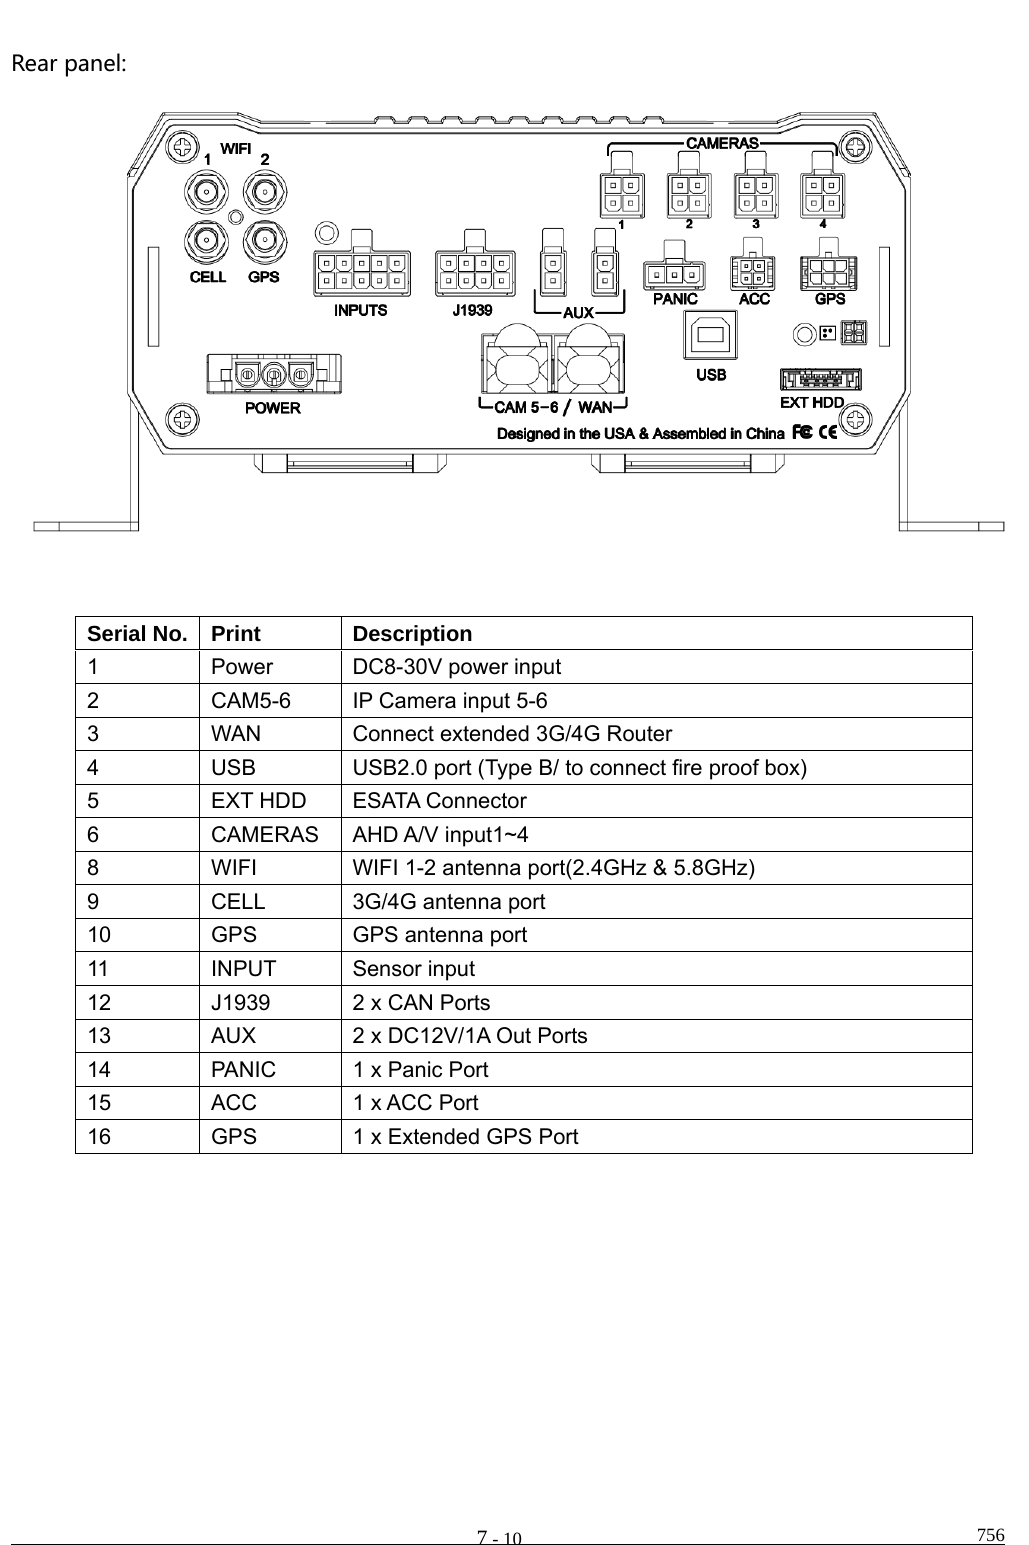                                                                                                                                                      756        7-10Rearpanel:Serial No.  Print  Description 1  Power  DC8-30V power input 2  CAM5-6  IP Camera input 5-6 3  WAN  Connect extended 3G/4G Router 4  USB  USB2.0 port (Type B/ to connect fire proof box) 5  EXT HDD  ESATA Connector 6  CAMERAS  AHD A/V input1~4 8  WIFI  WIFI 1-2 antenna port(2.4GHz &amp; 5.8GHz) 9  CELL  3G/4G antenna port 10  GPS  GPS antenna port 11  INPUT  Sensor input 12  J1939  2 x CAN Ports 13  AUX  2 x DC12V/1A Out Ports 14  PANIC  1 x Panic Port 15  ACC  1 x ACC Port 16  GPS  1 x Extended GPS Port     